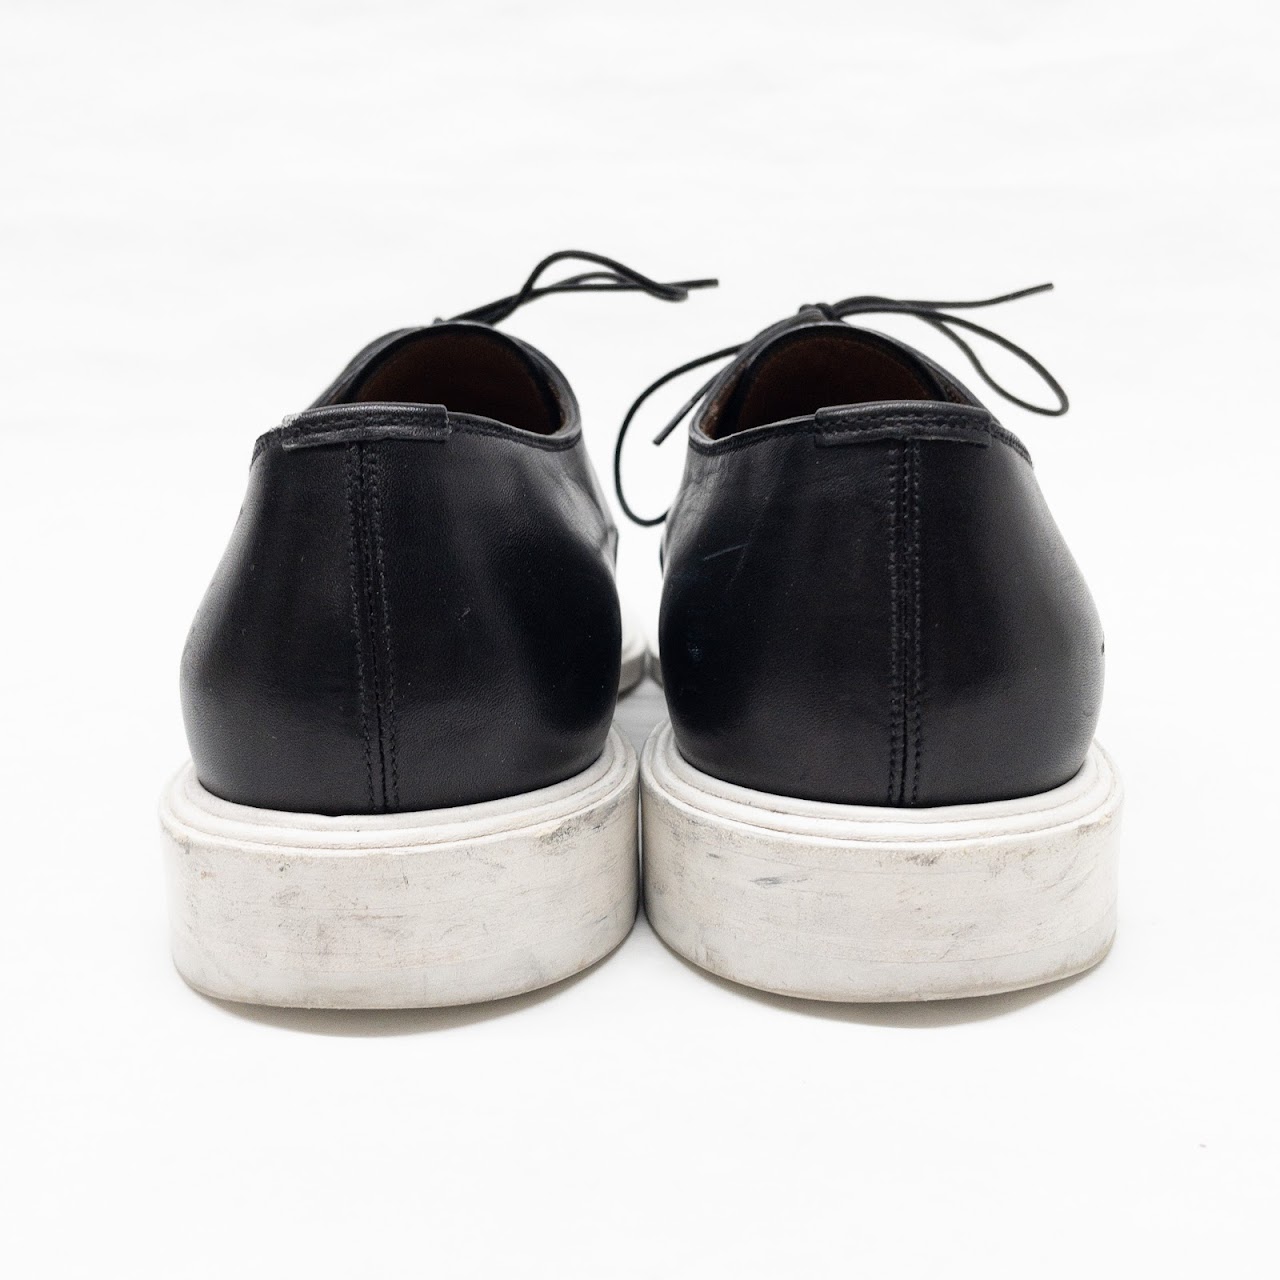 Givenchy Black & White Leather Lace Ups